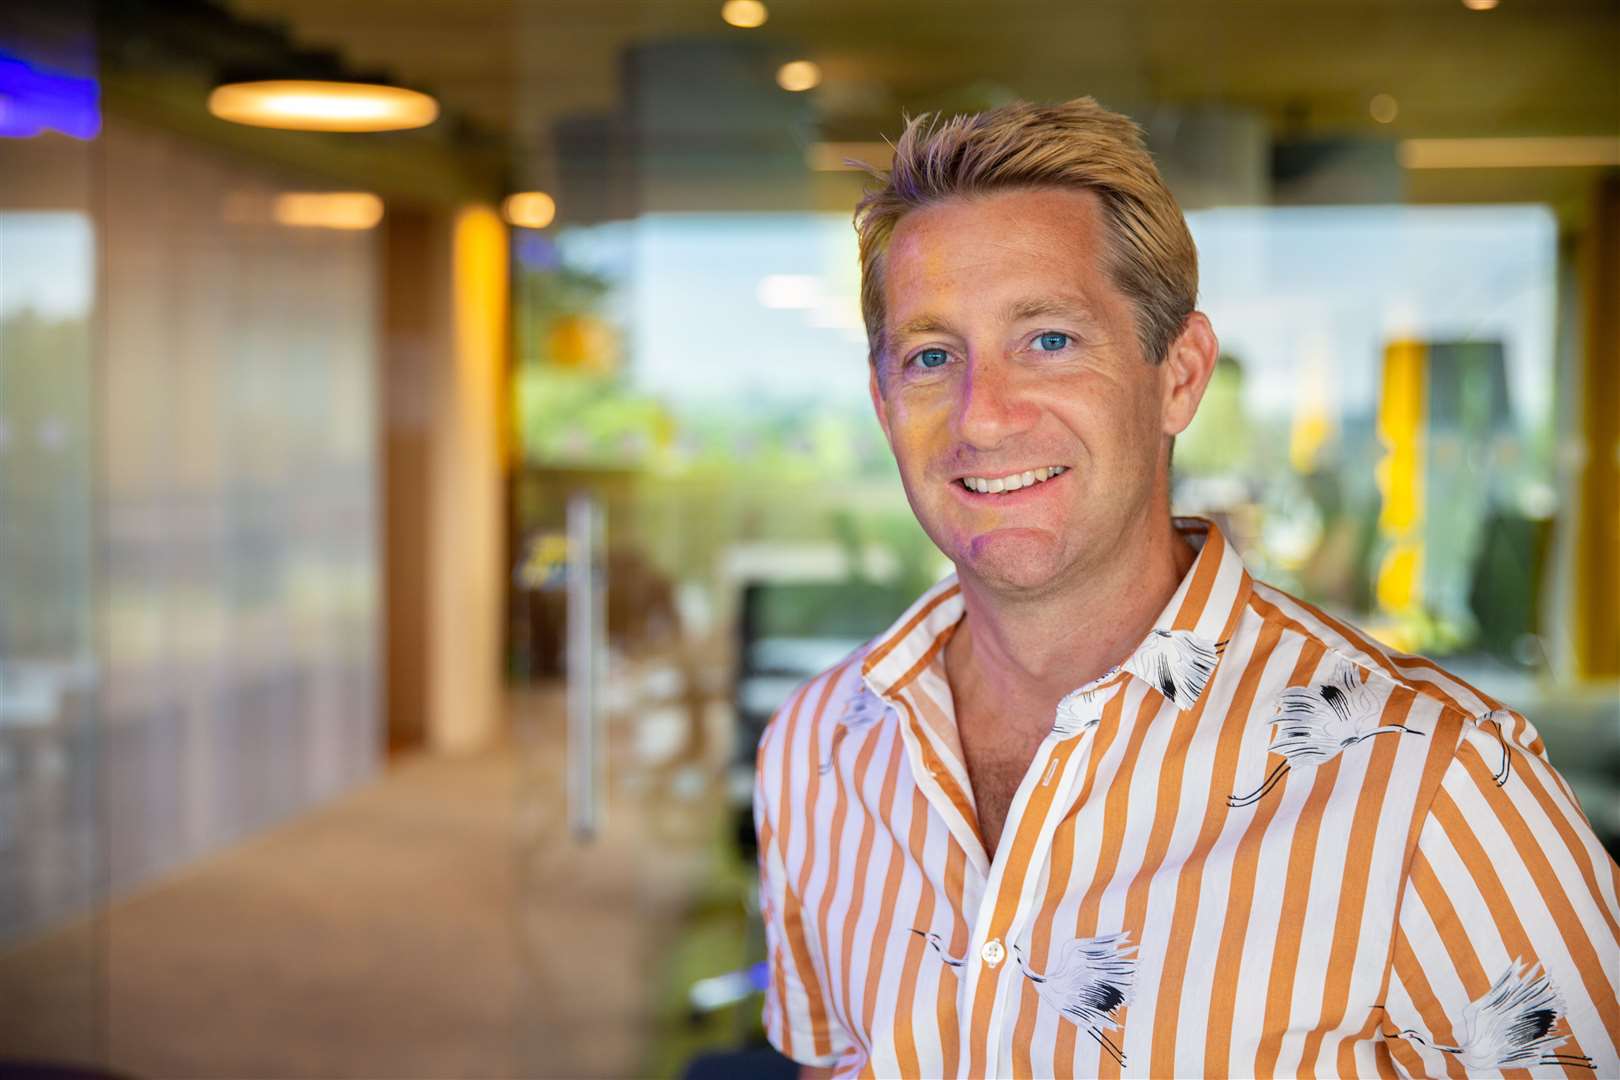 Matthew Pack, Group CEO at Holiday Extras